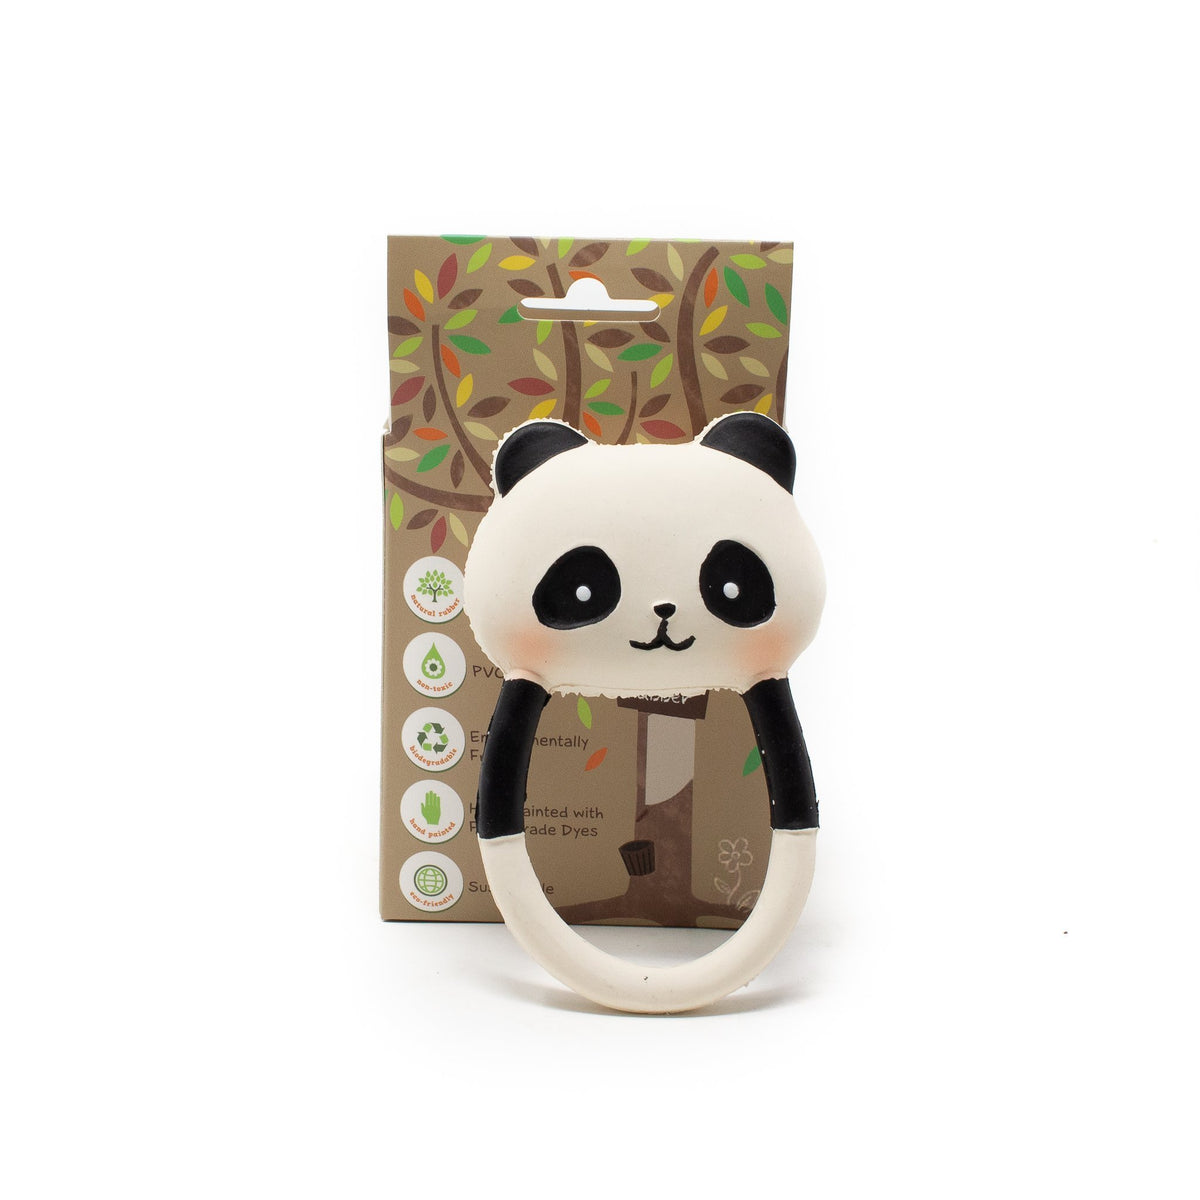 Panda the Teether by Lanco - Natural Rubber Toys